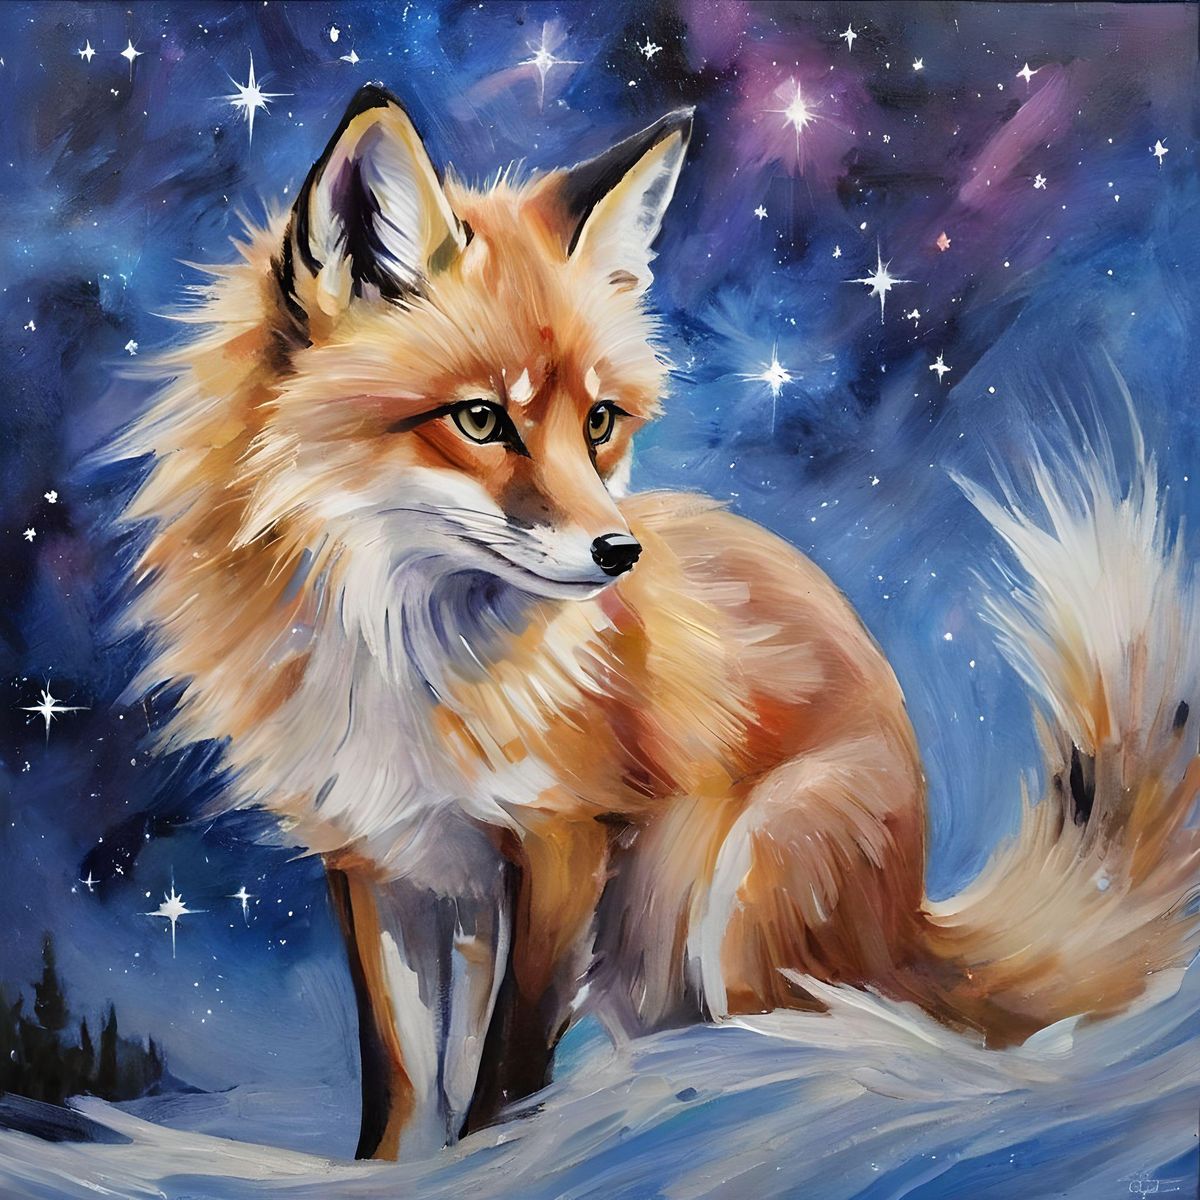 A nine tail fox with the colors of the galaxy. Her eyes are stars of blue, and her tails are the colors of the Aurora Borealis.